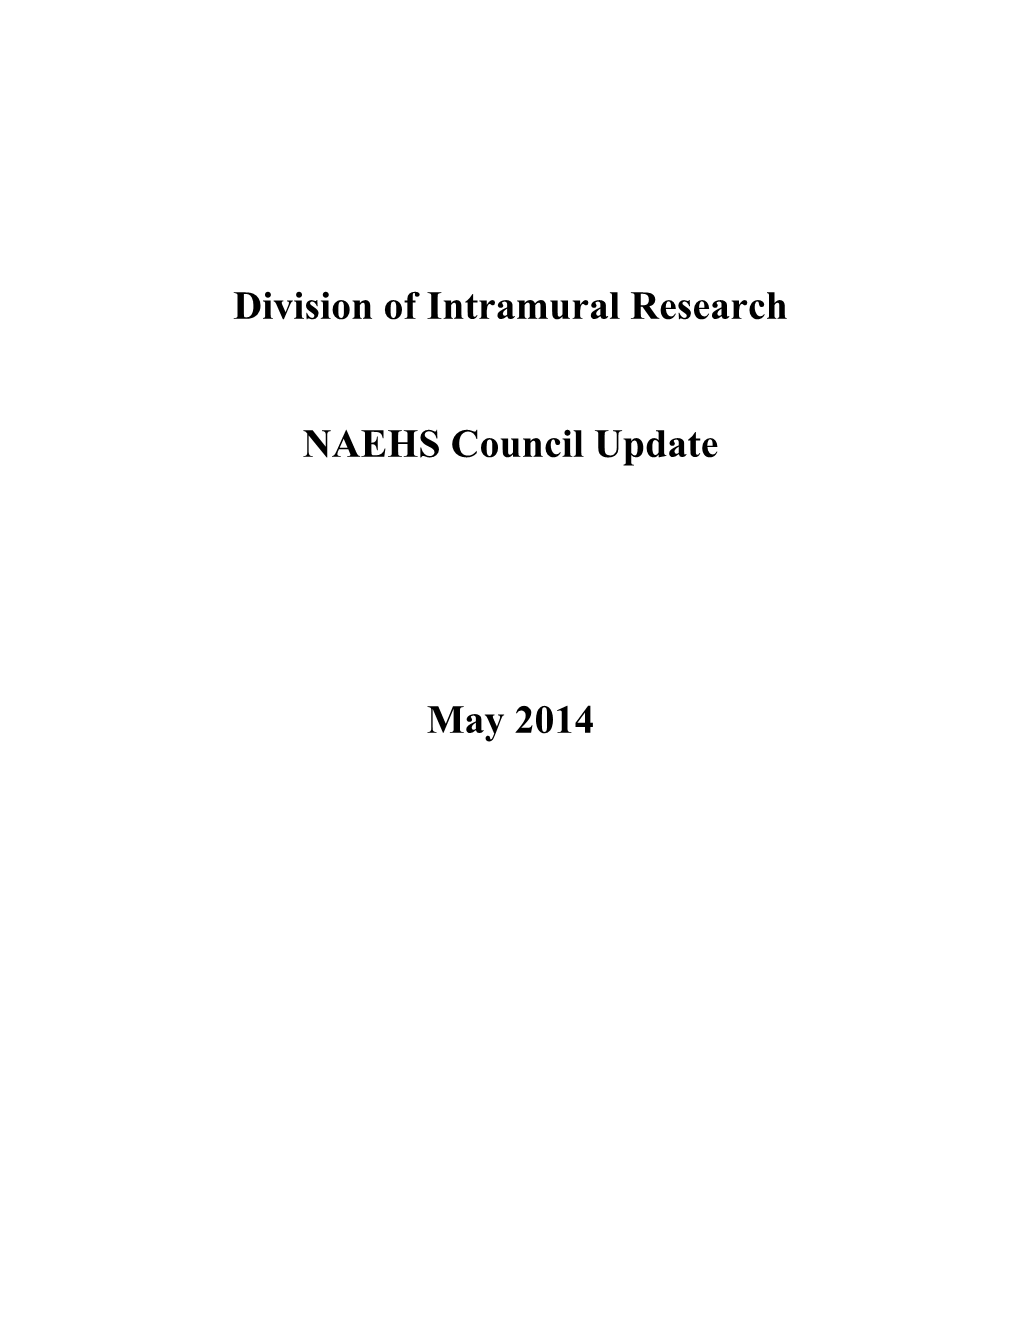 May14 NAEHS Council Update